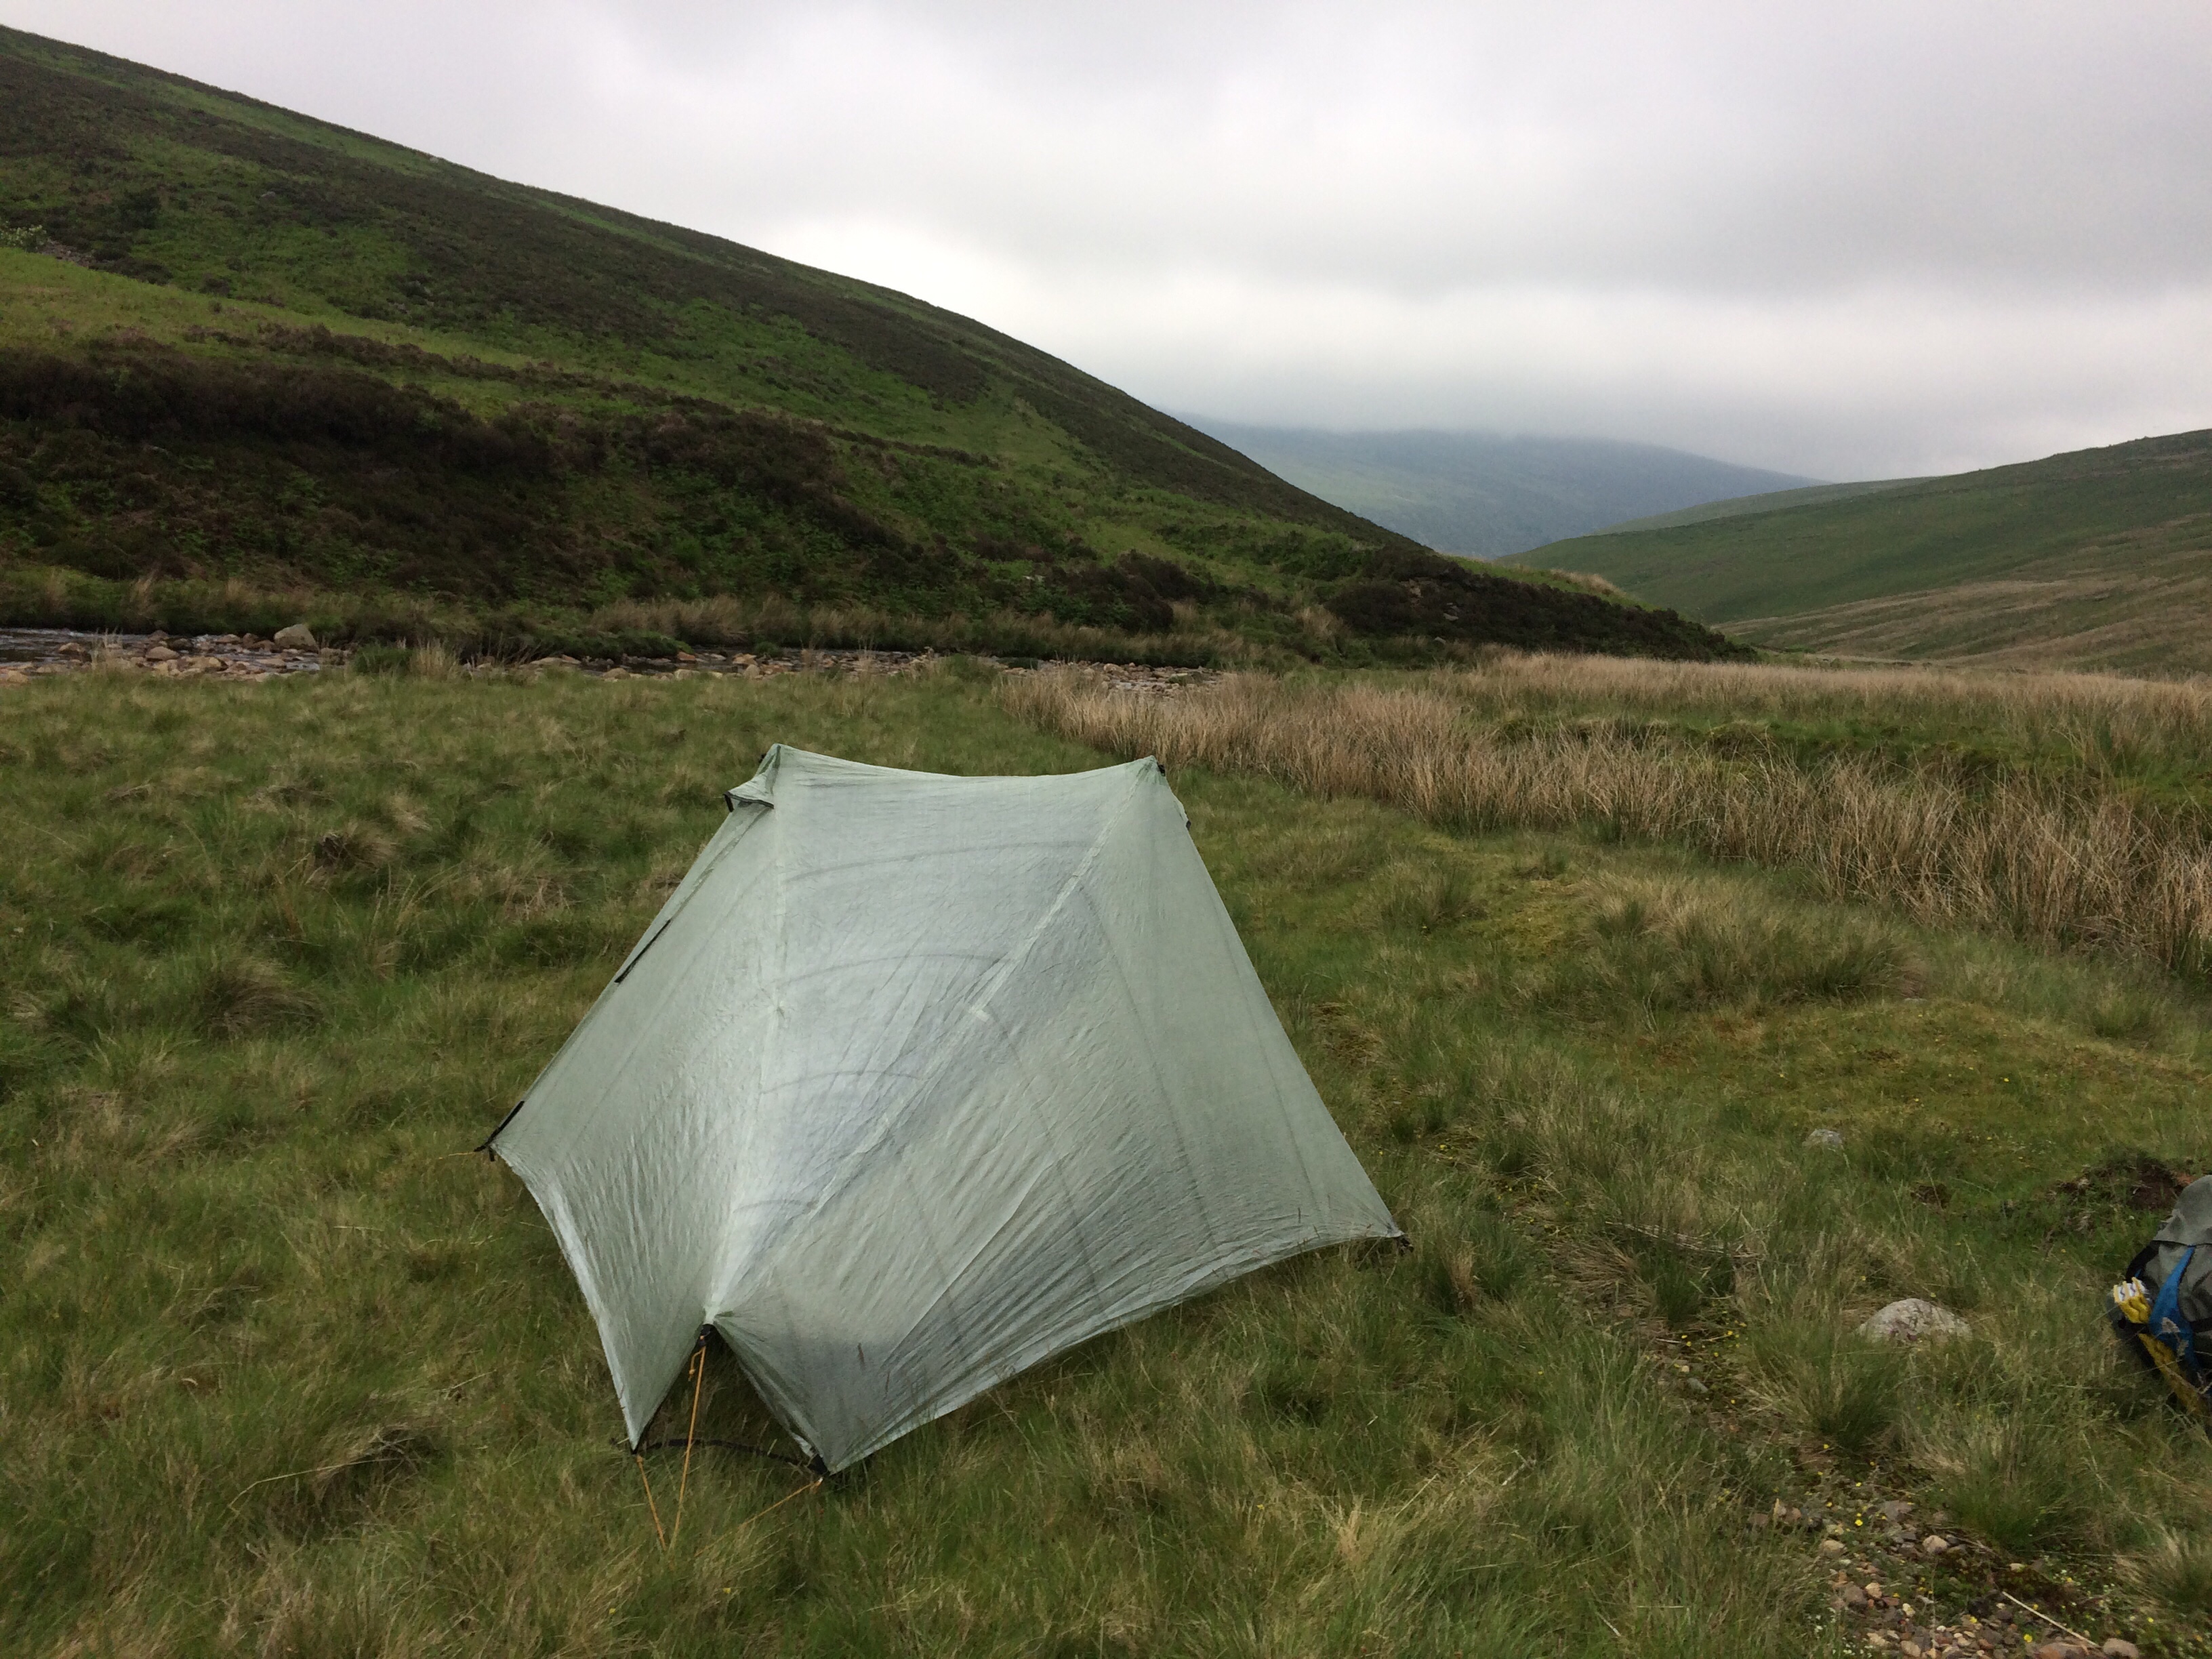 The alicoop was pounded with rain at Camp "Spooky" in the Lake District, but not one drop came inside.